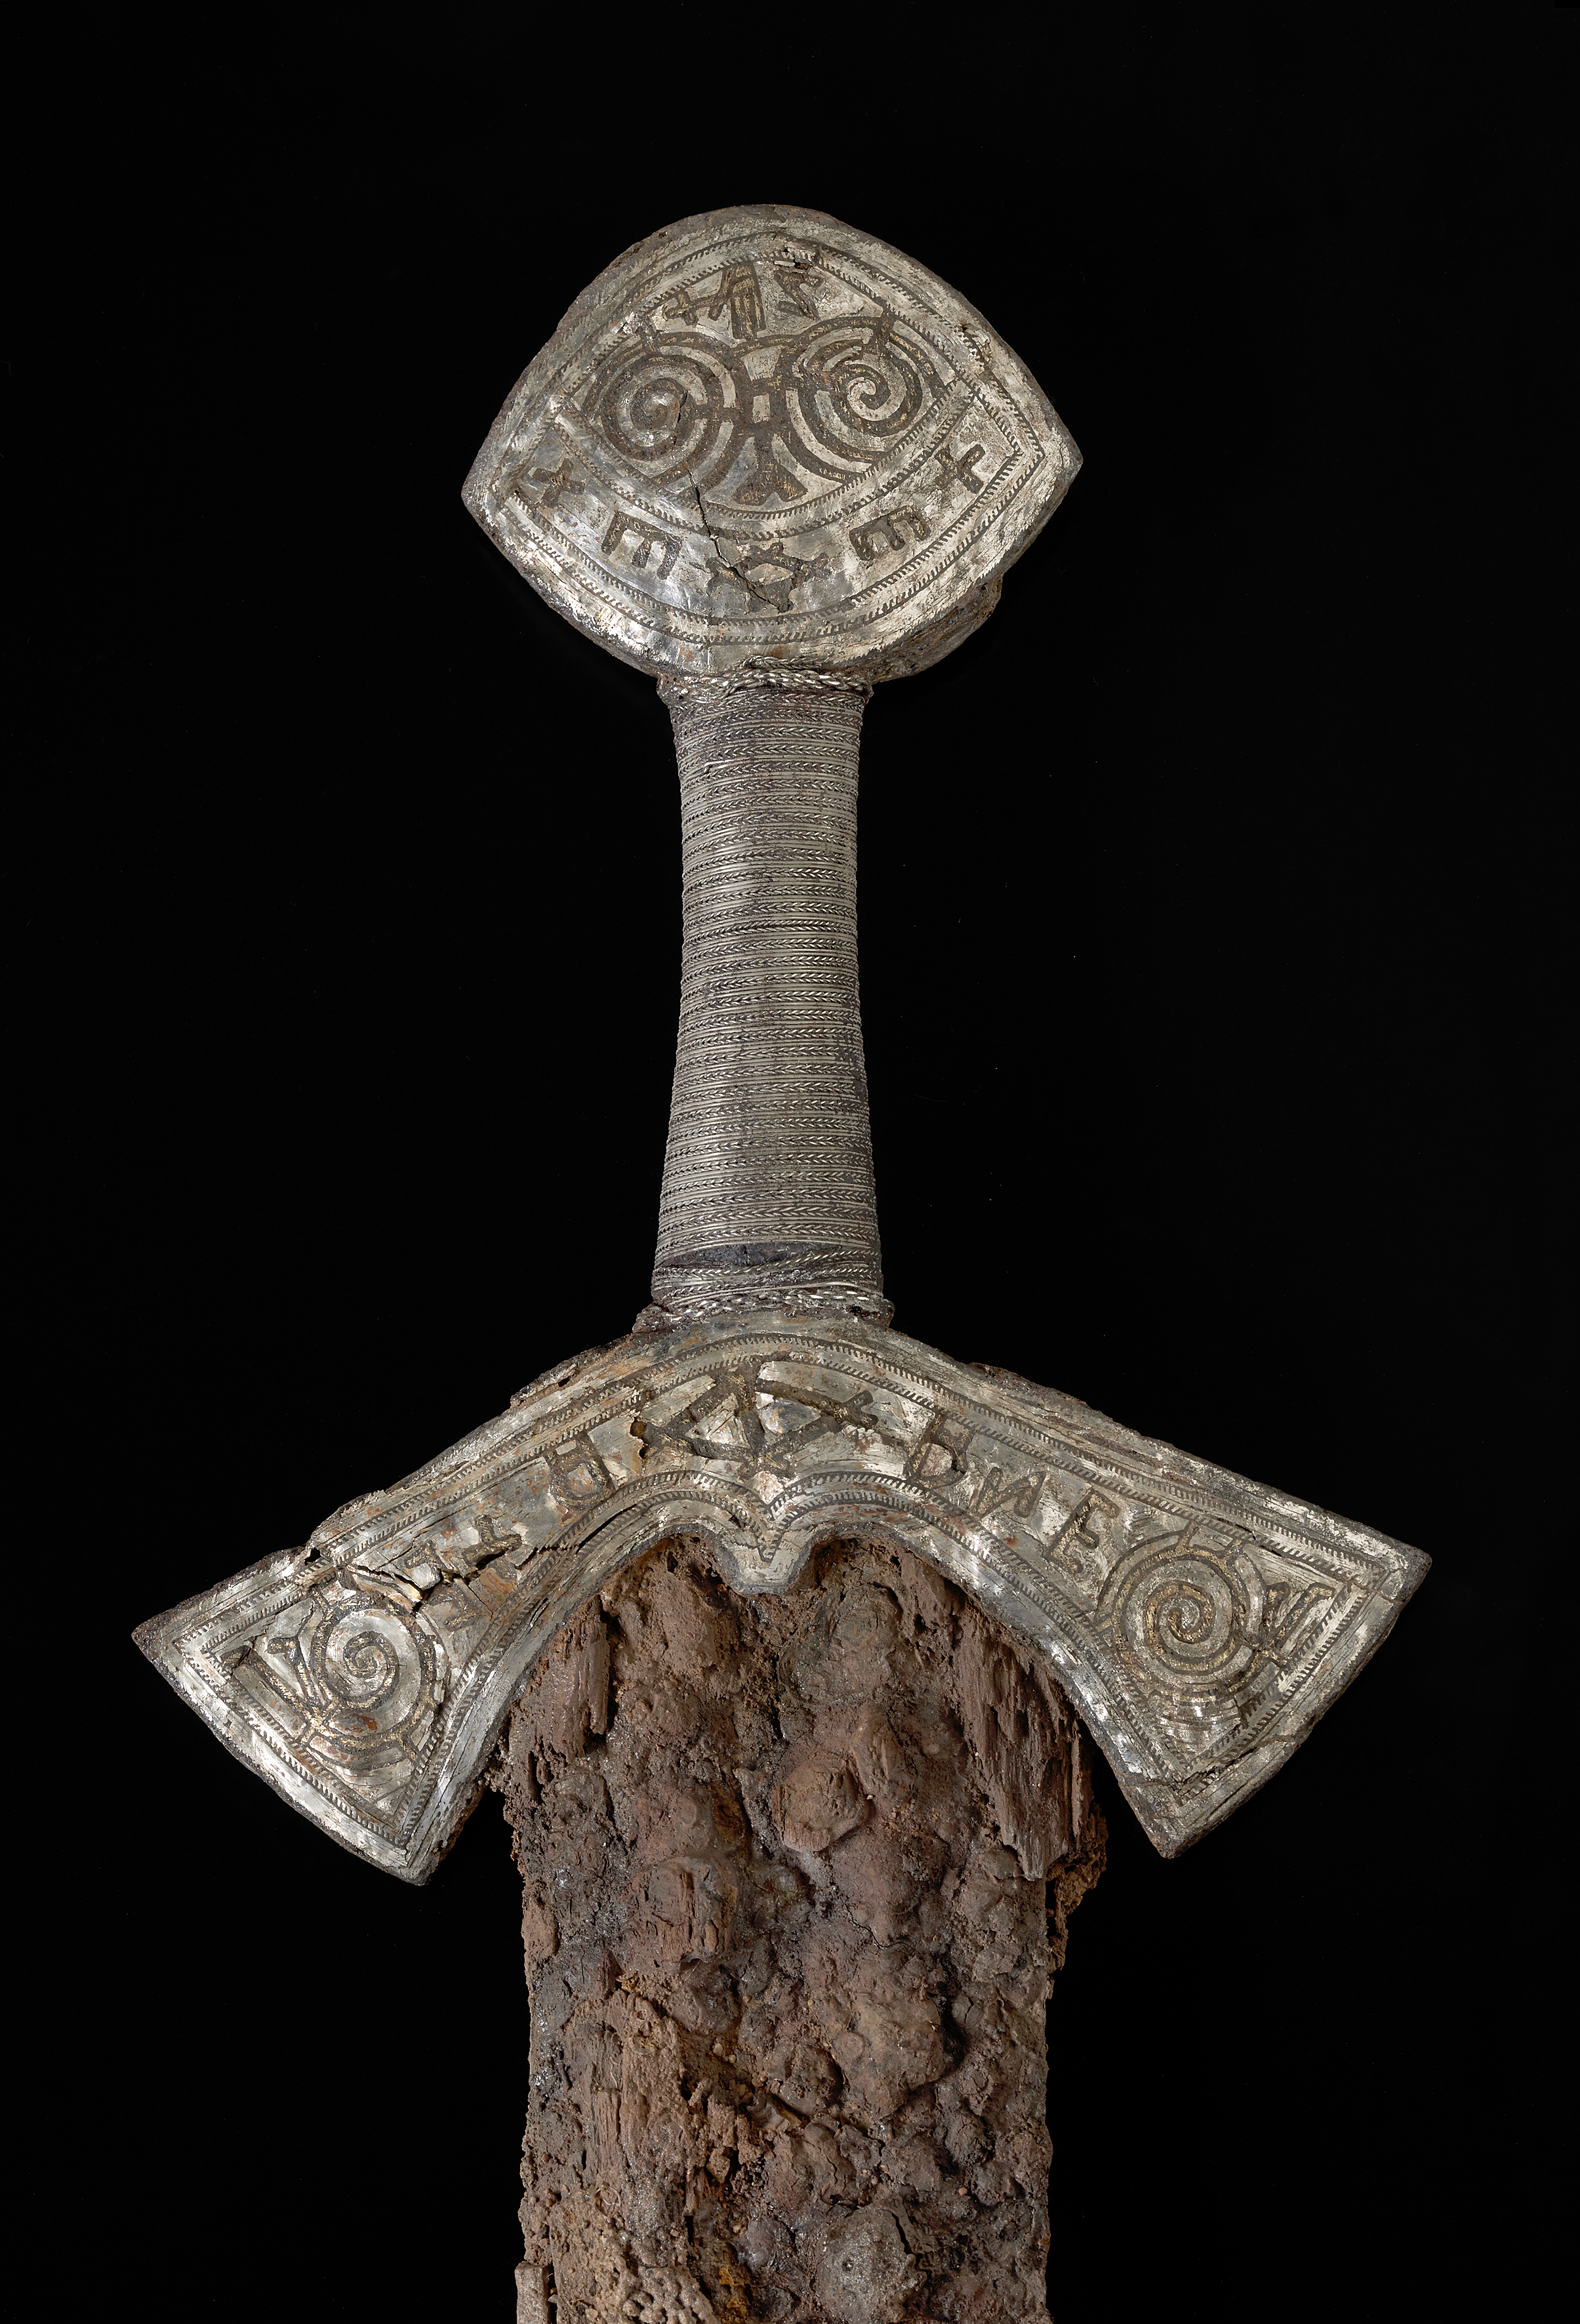 The History Blog » Blog Archive » Gilded Late Viking sword found in Norway